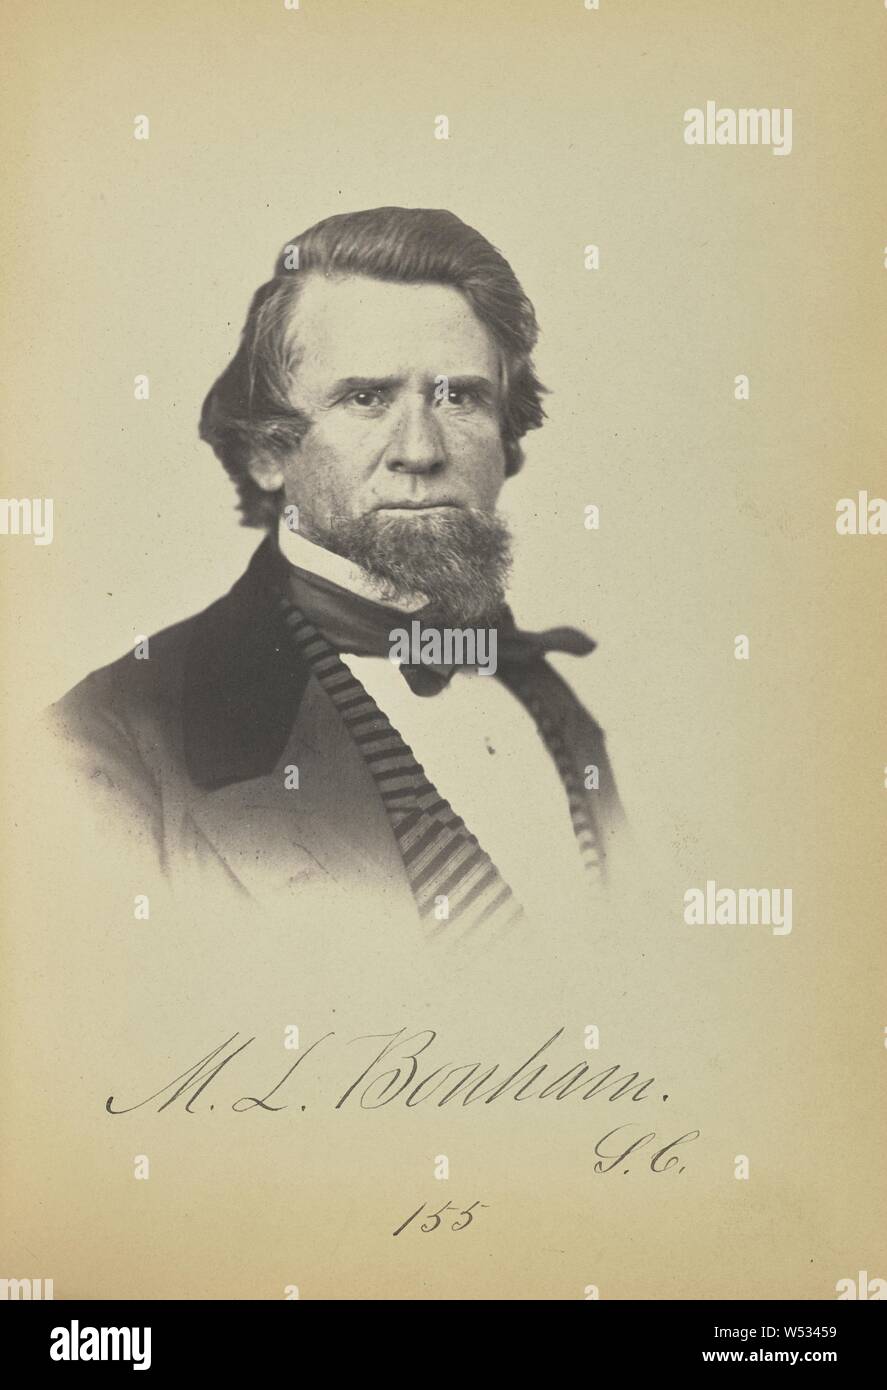 Milledge L. Bonham, James Earle McClees (American, 1821 - 1887), Julian Vannerson (American, 1827 - after 1875), Washington, District of Columbia, United States, about 1859, Salted paper print, 10.5 × 8.1 cm (4 1/8 × 3 3/16 in Stock Photo